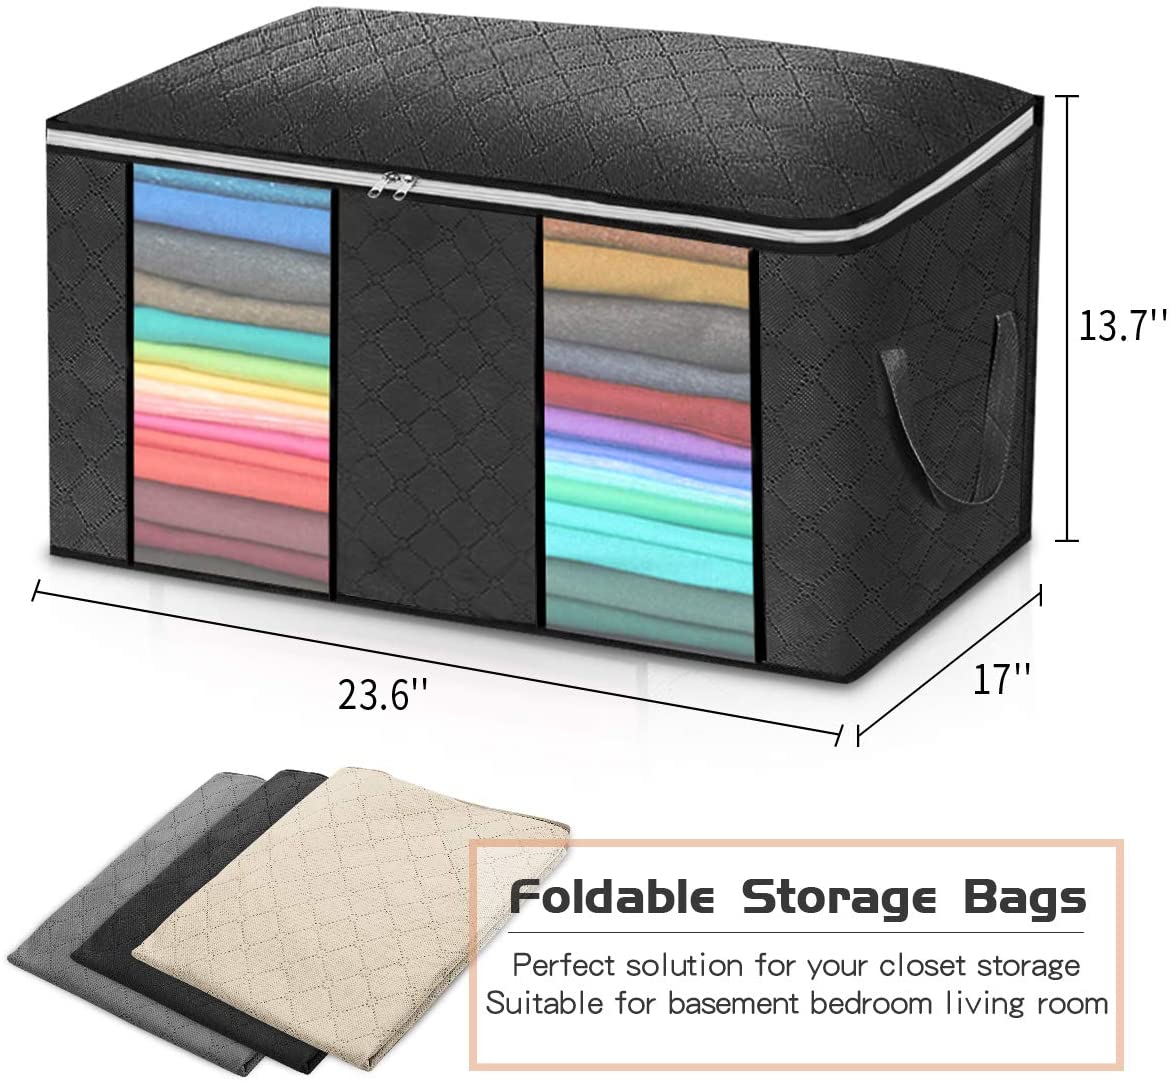 Closet Storage Bags Organizers, Large Clothing Storage Bags with Reinforced Handle, Foldable Clothes Storage Bags Closet Organizers, Blanket Storage Bags for Bedding, Clothes - 4 Pack - image 2 of 8